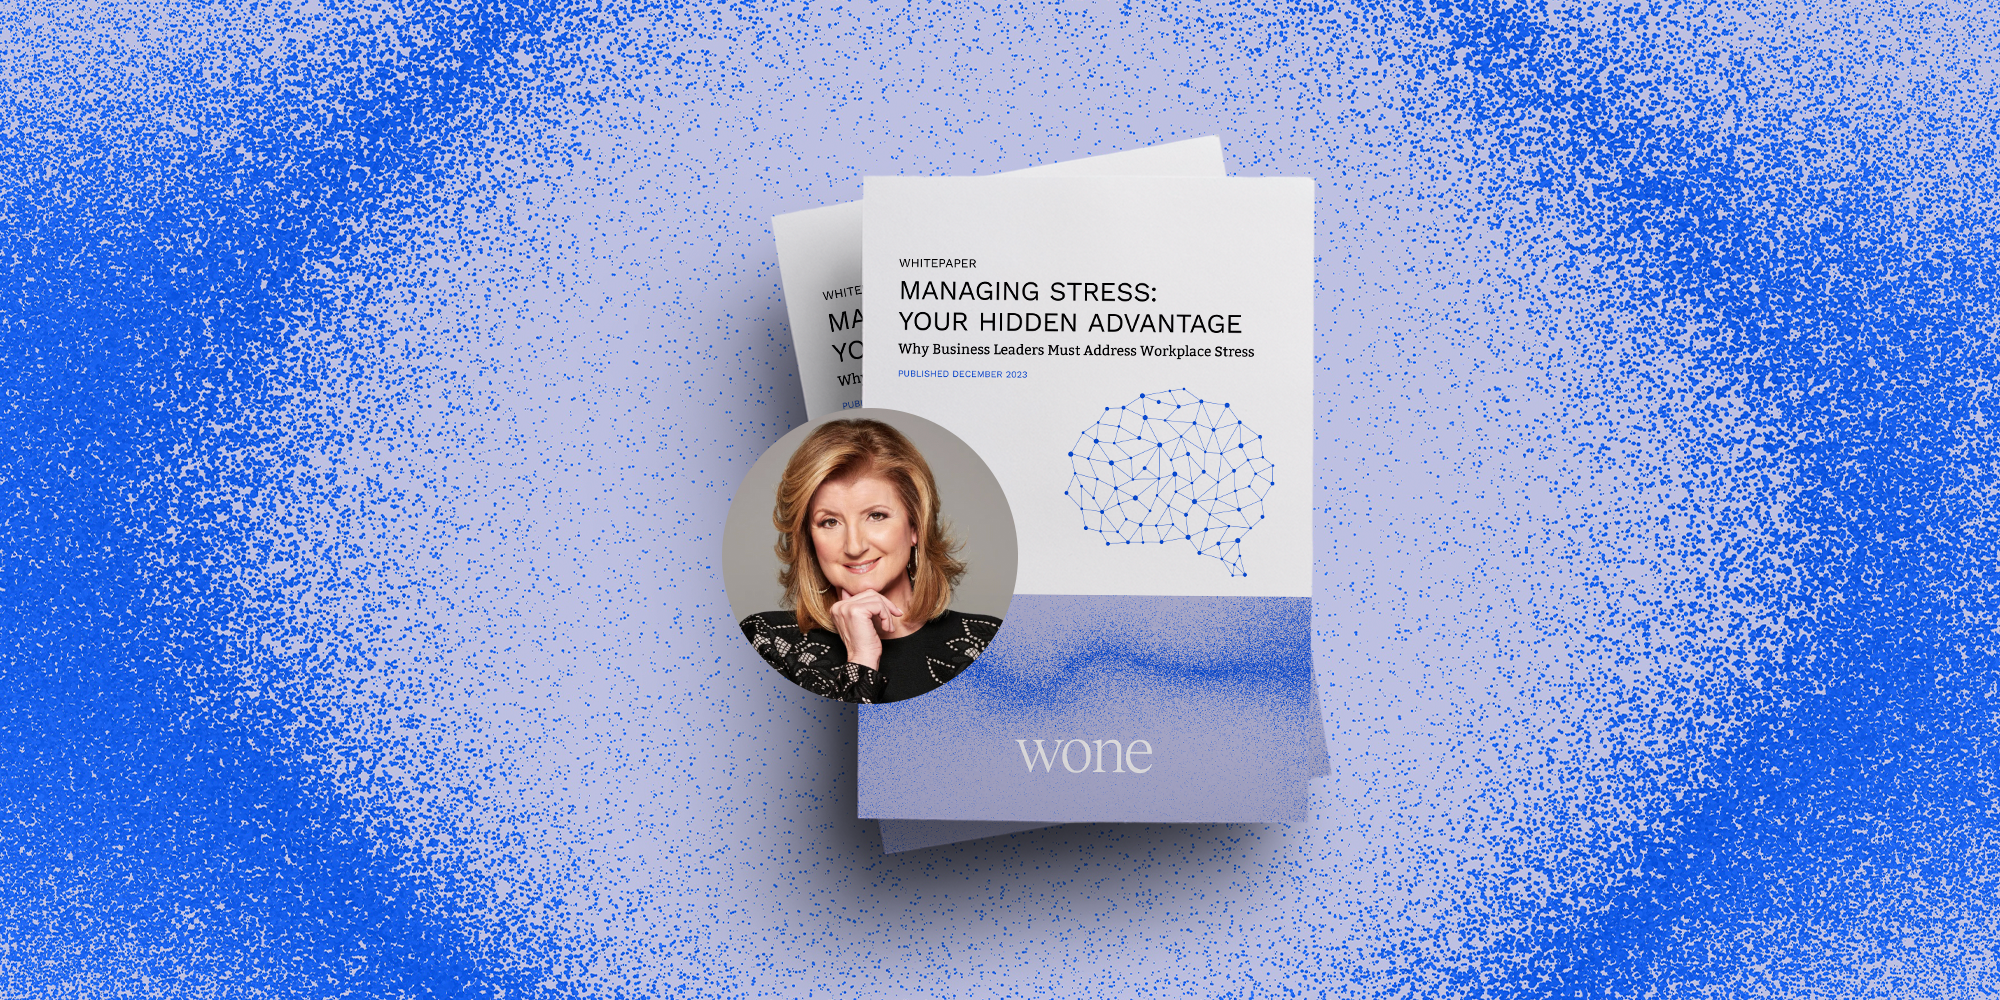 Cover Image for An interview with Arianna Huffington: “Taking stress seriously is something all leaders should do”